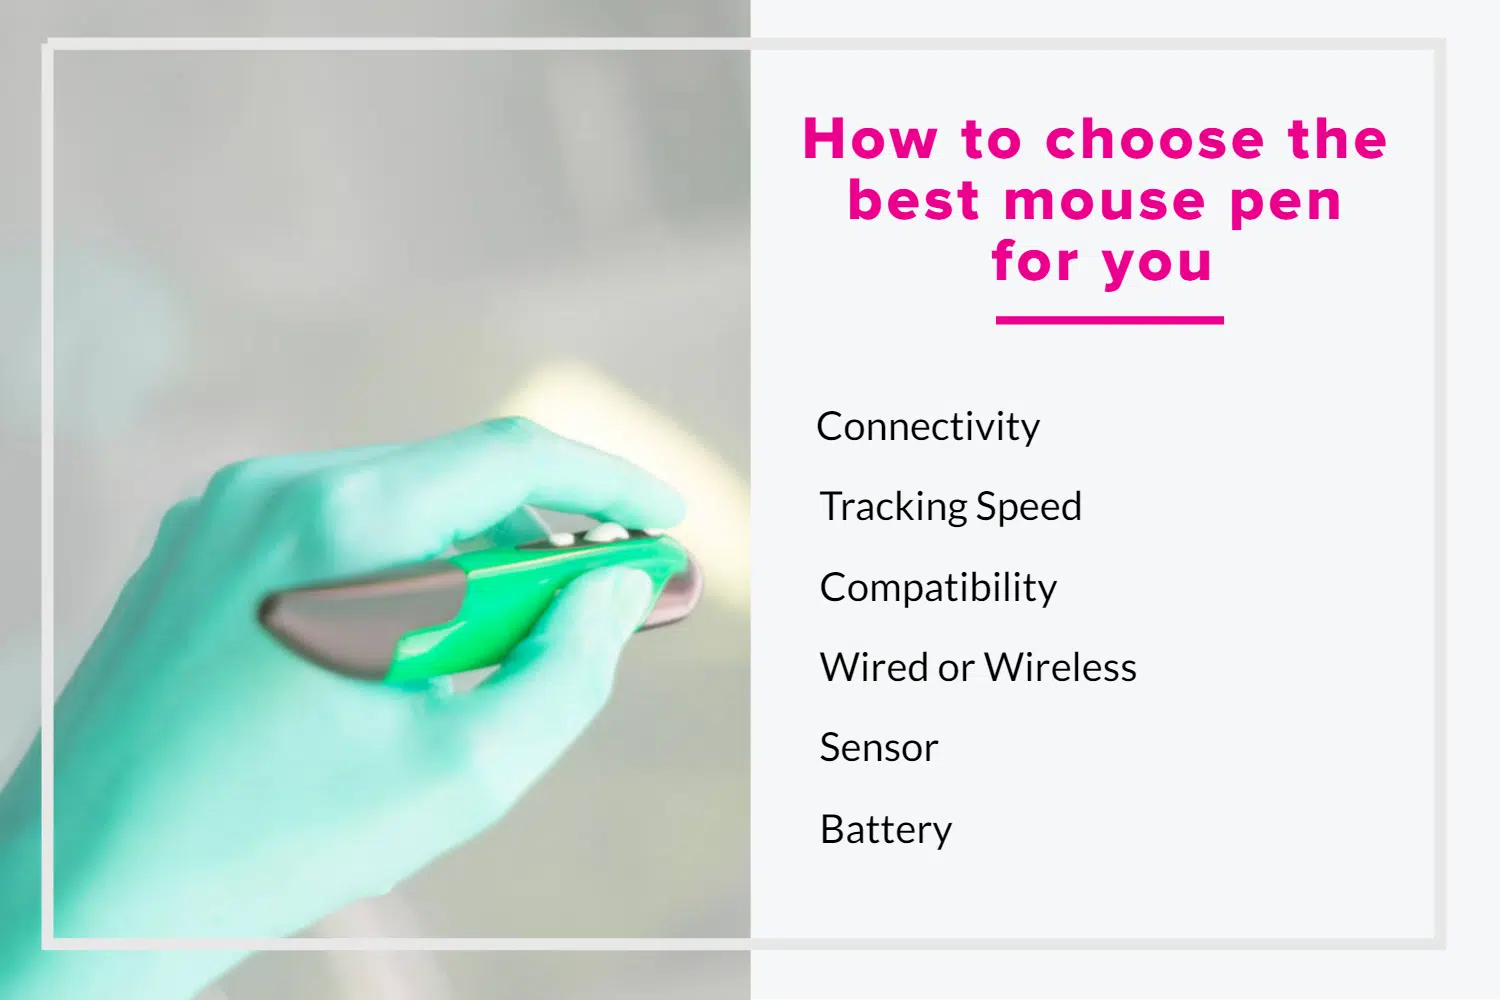 How to choose the best mouse pen for you